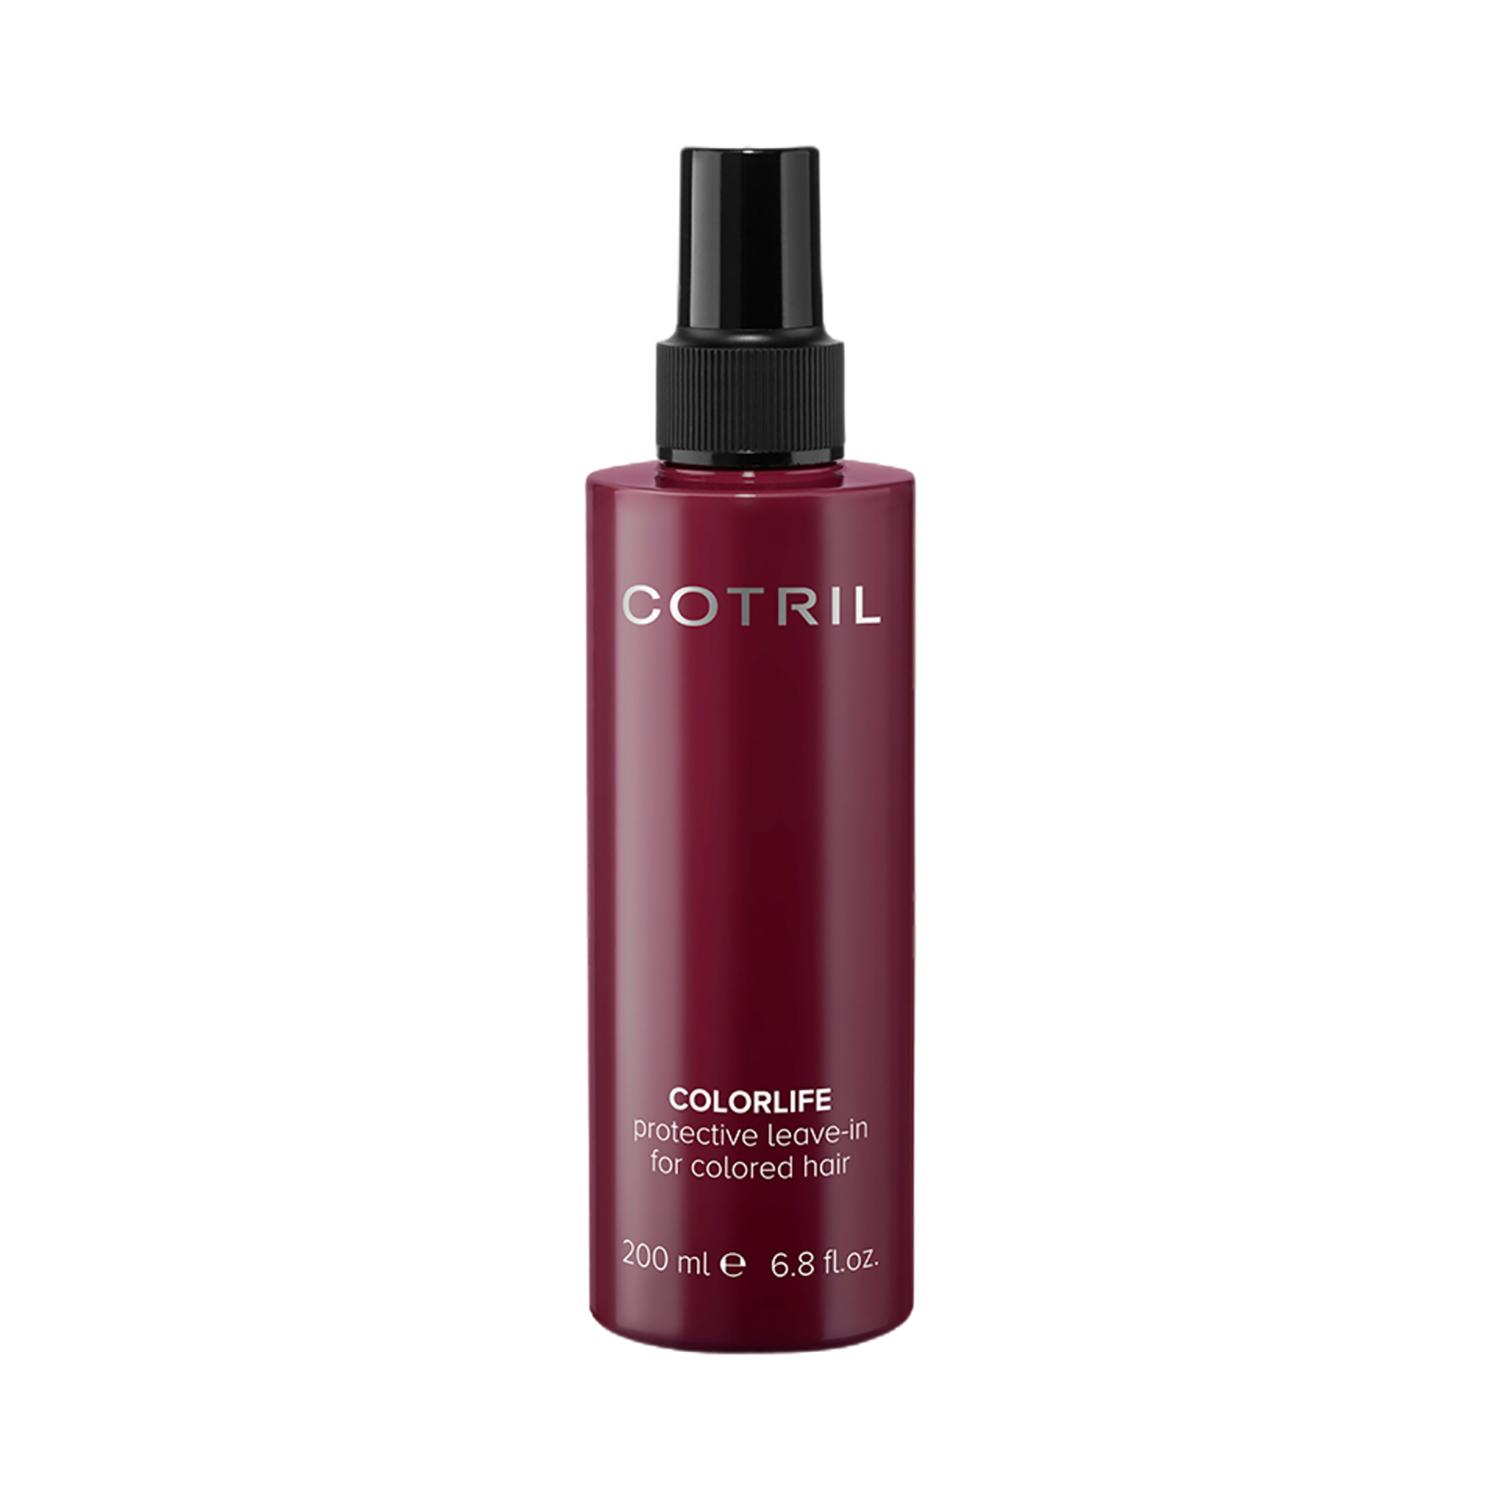 COTRIL Colorlife Protective Leave In For Colored Hair (200 ml)